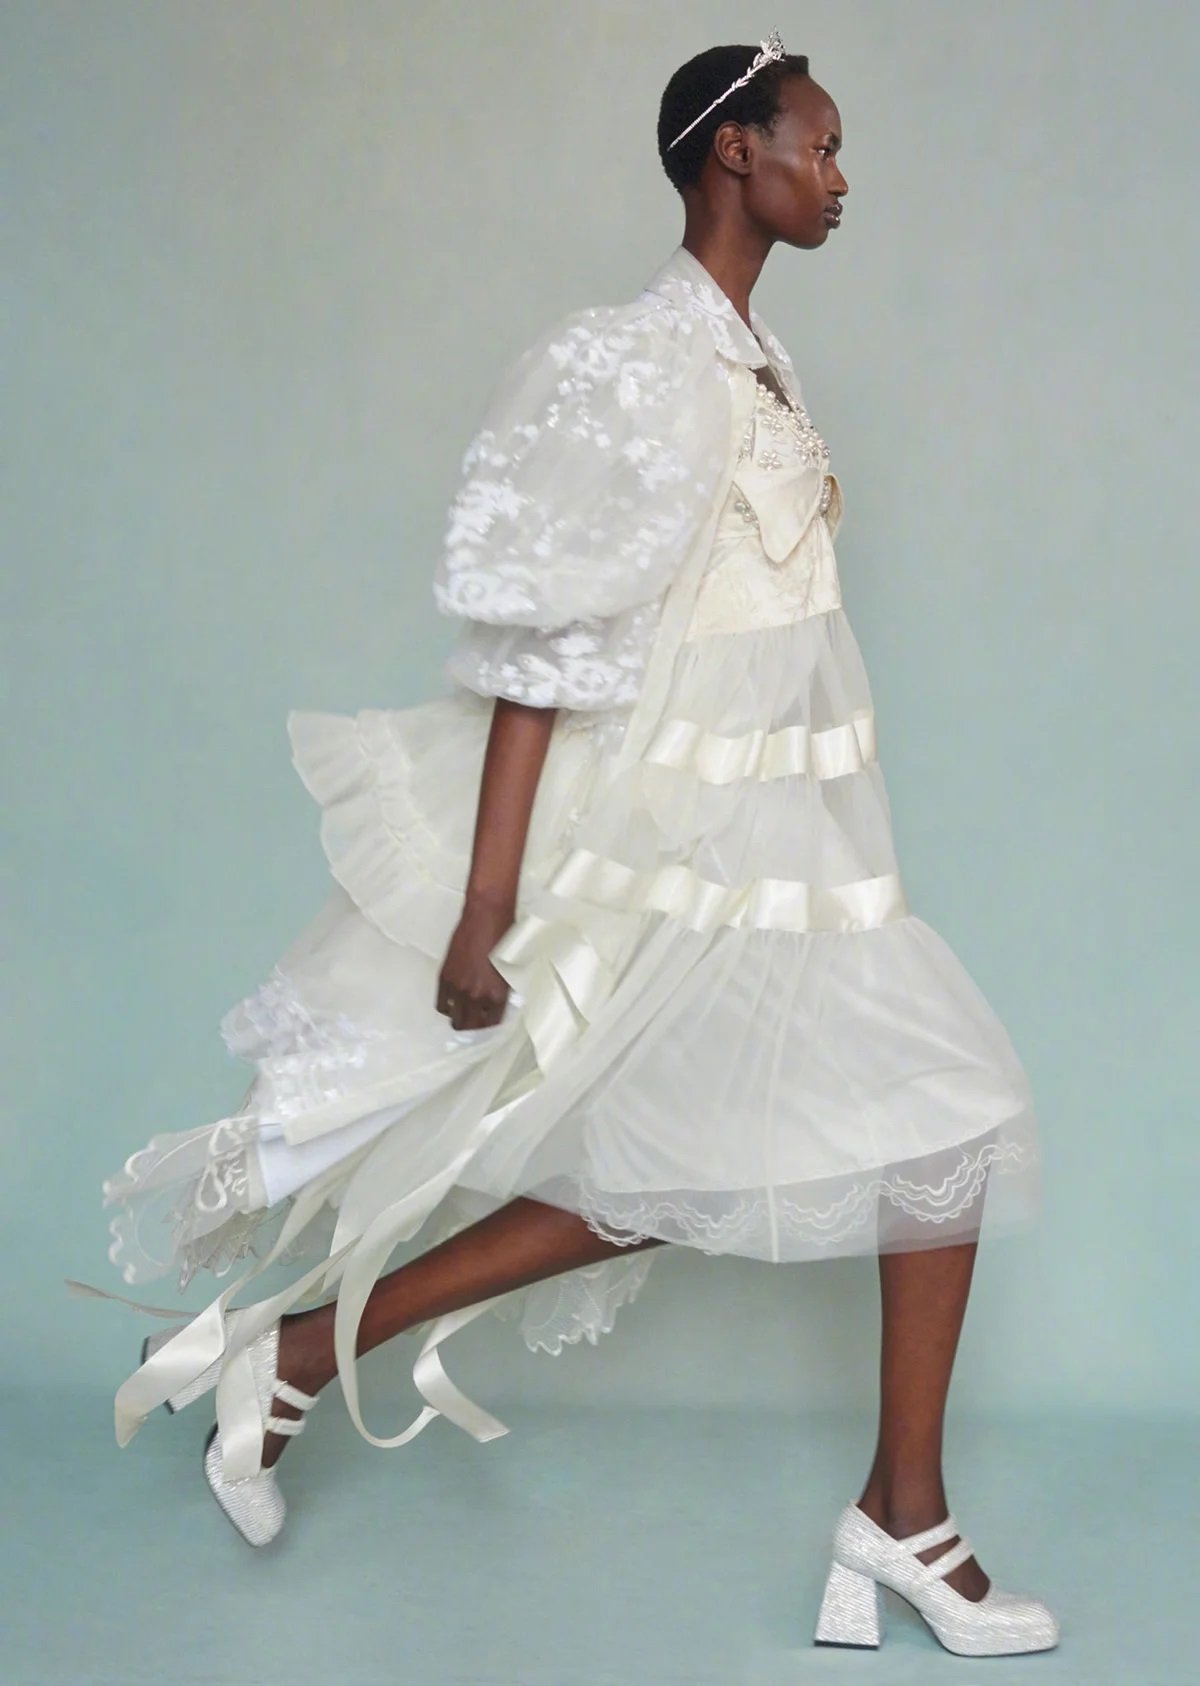 Nyarach-Abouch-Ayuel-covers-British-Vogue-Weddings-May-2022-by-Emma-Tempest-8.jpg